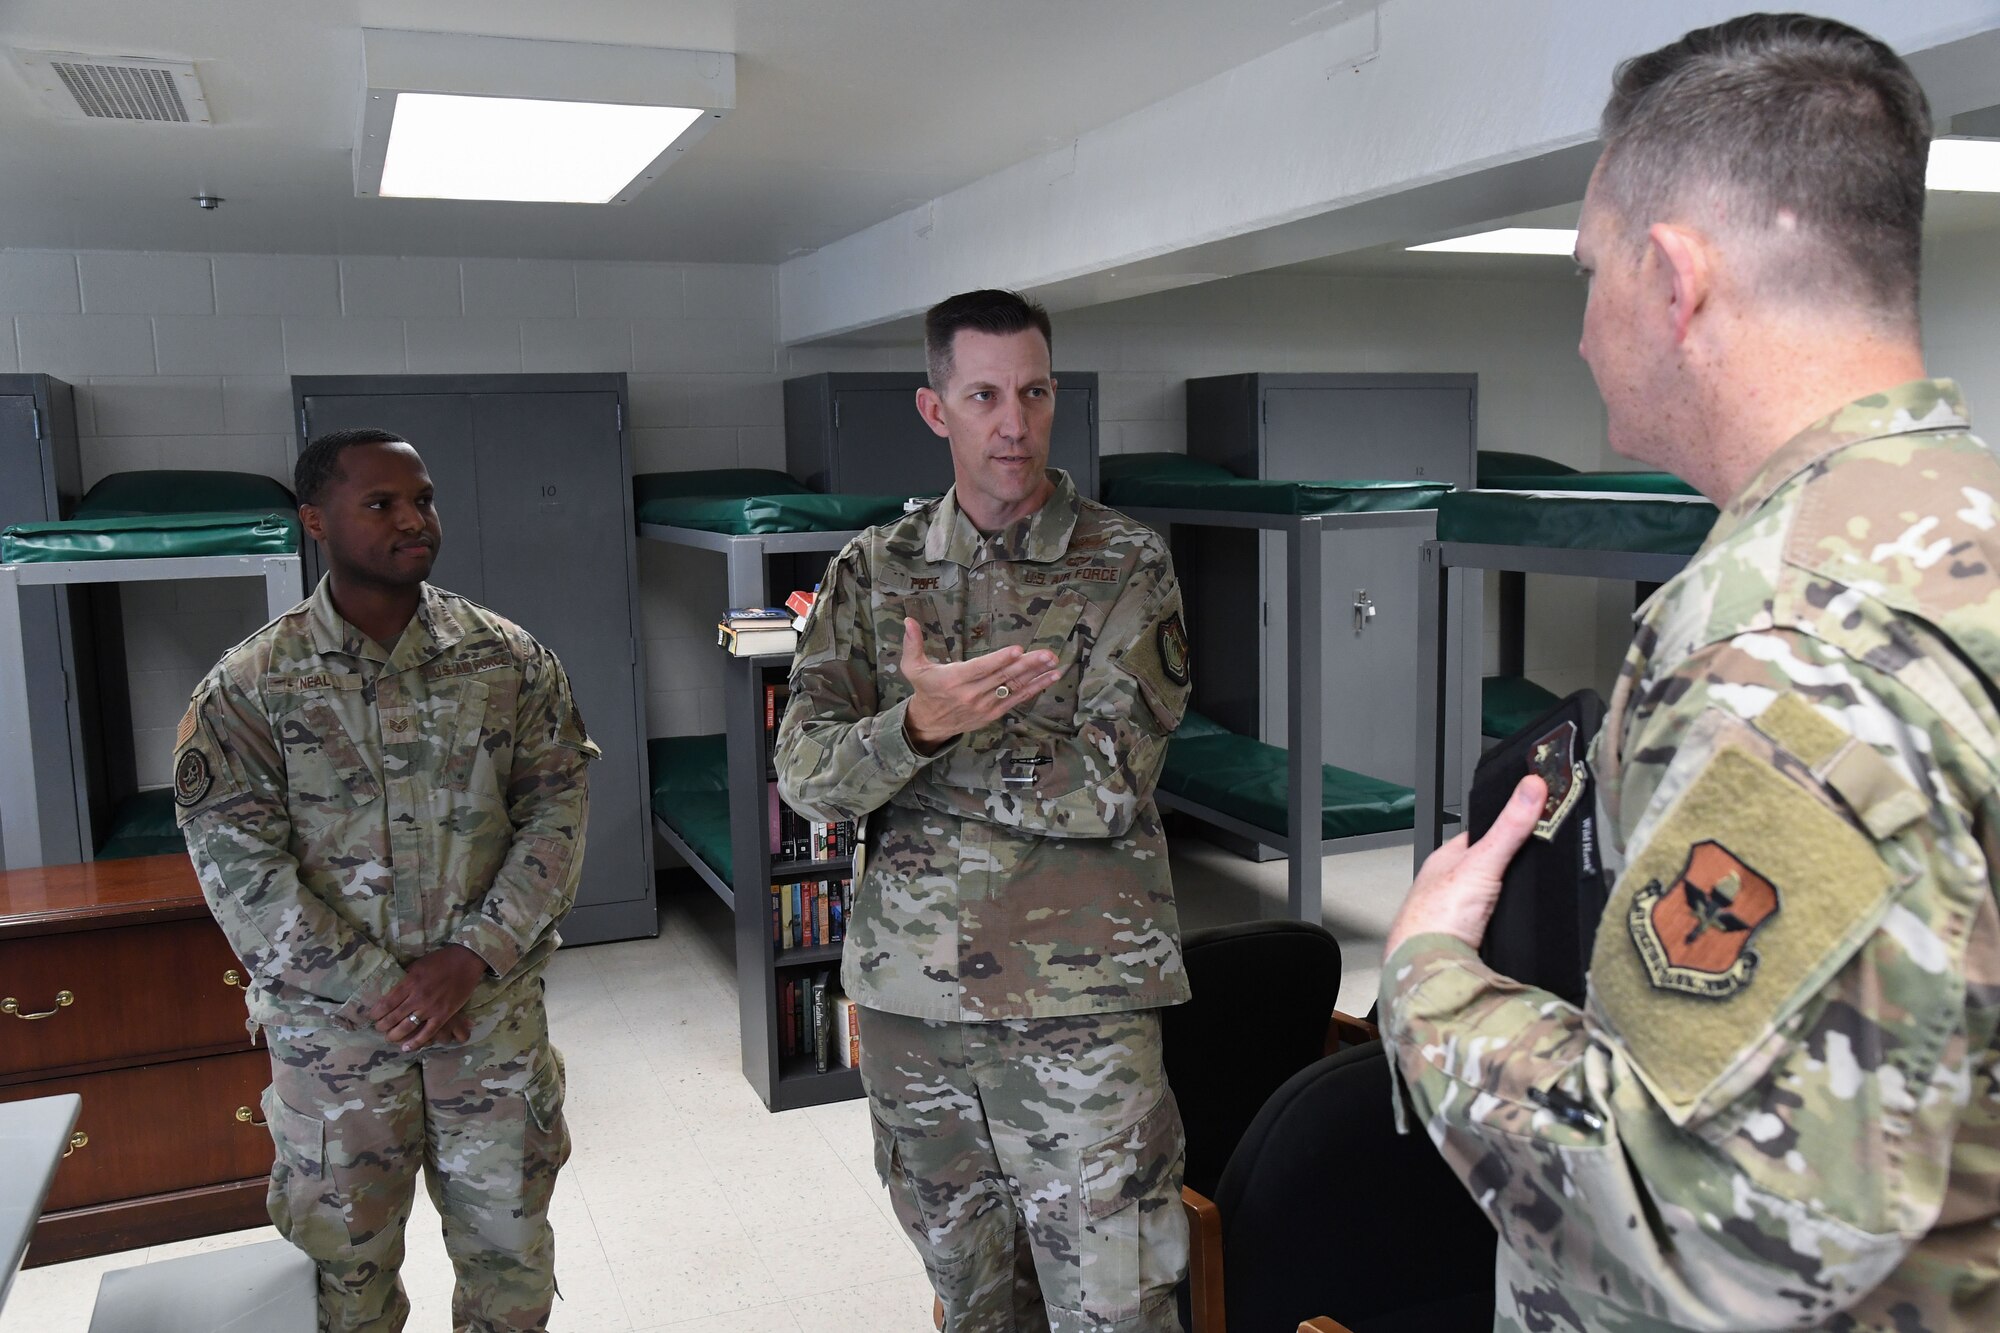 U.S. Air Force Staff Sgt. Cedrick Neal, 81st Security Forces Squadron police services, and Col. Chad Gemeinhardt, 81st Mission Support Group commander, provides Col. Billy Pope, 81st Training Wing commander, with a tour inside the 81st SFS building and an overview of the squadron's mission and capabilities during the 81st MSG Immersion Tour at Keesler Air Force Base, Mississippi, April 7, 2023.